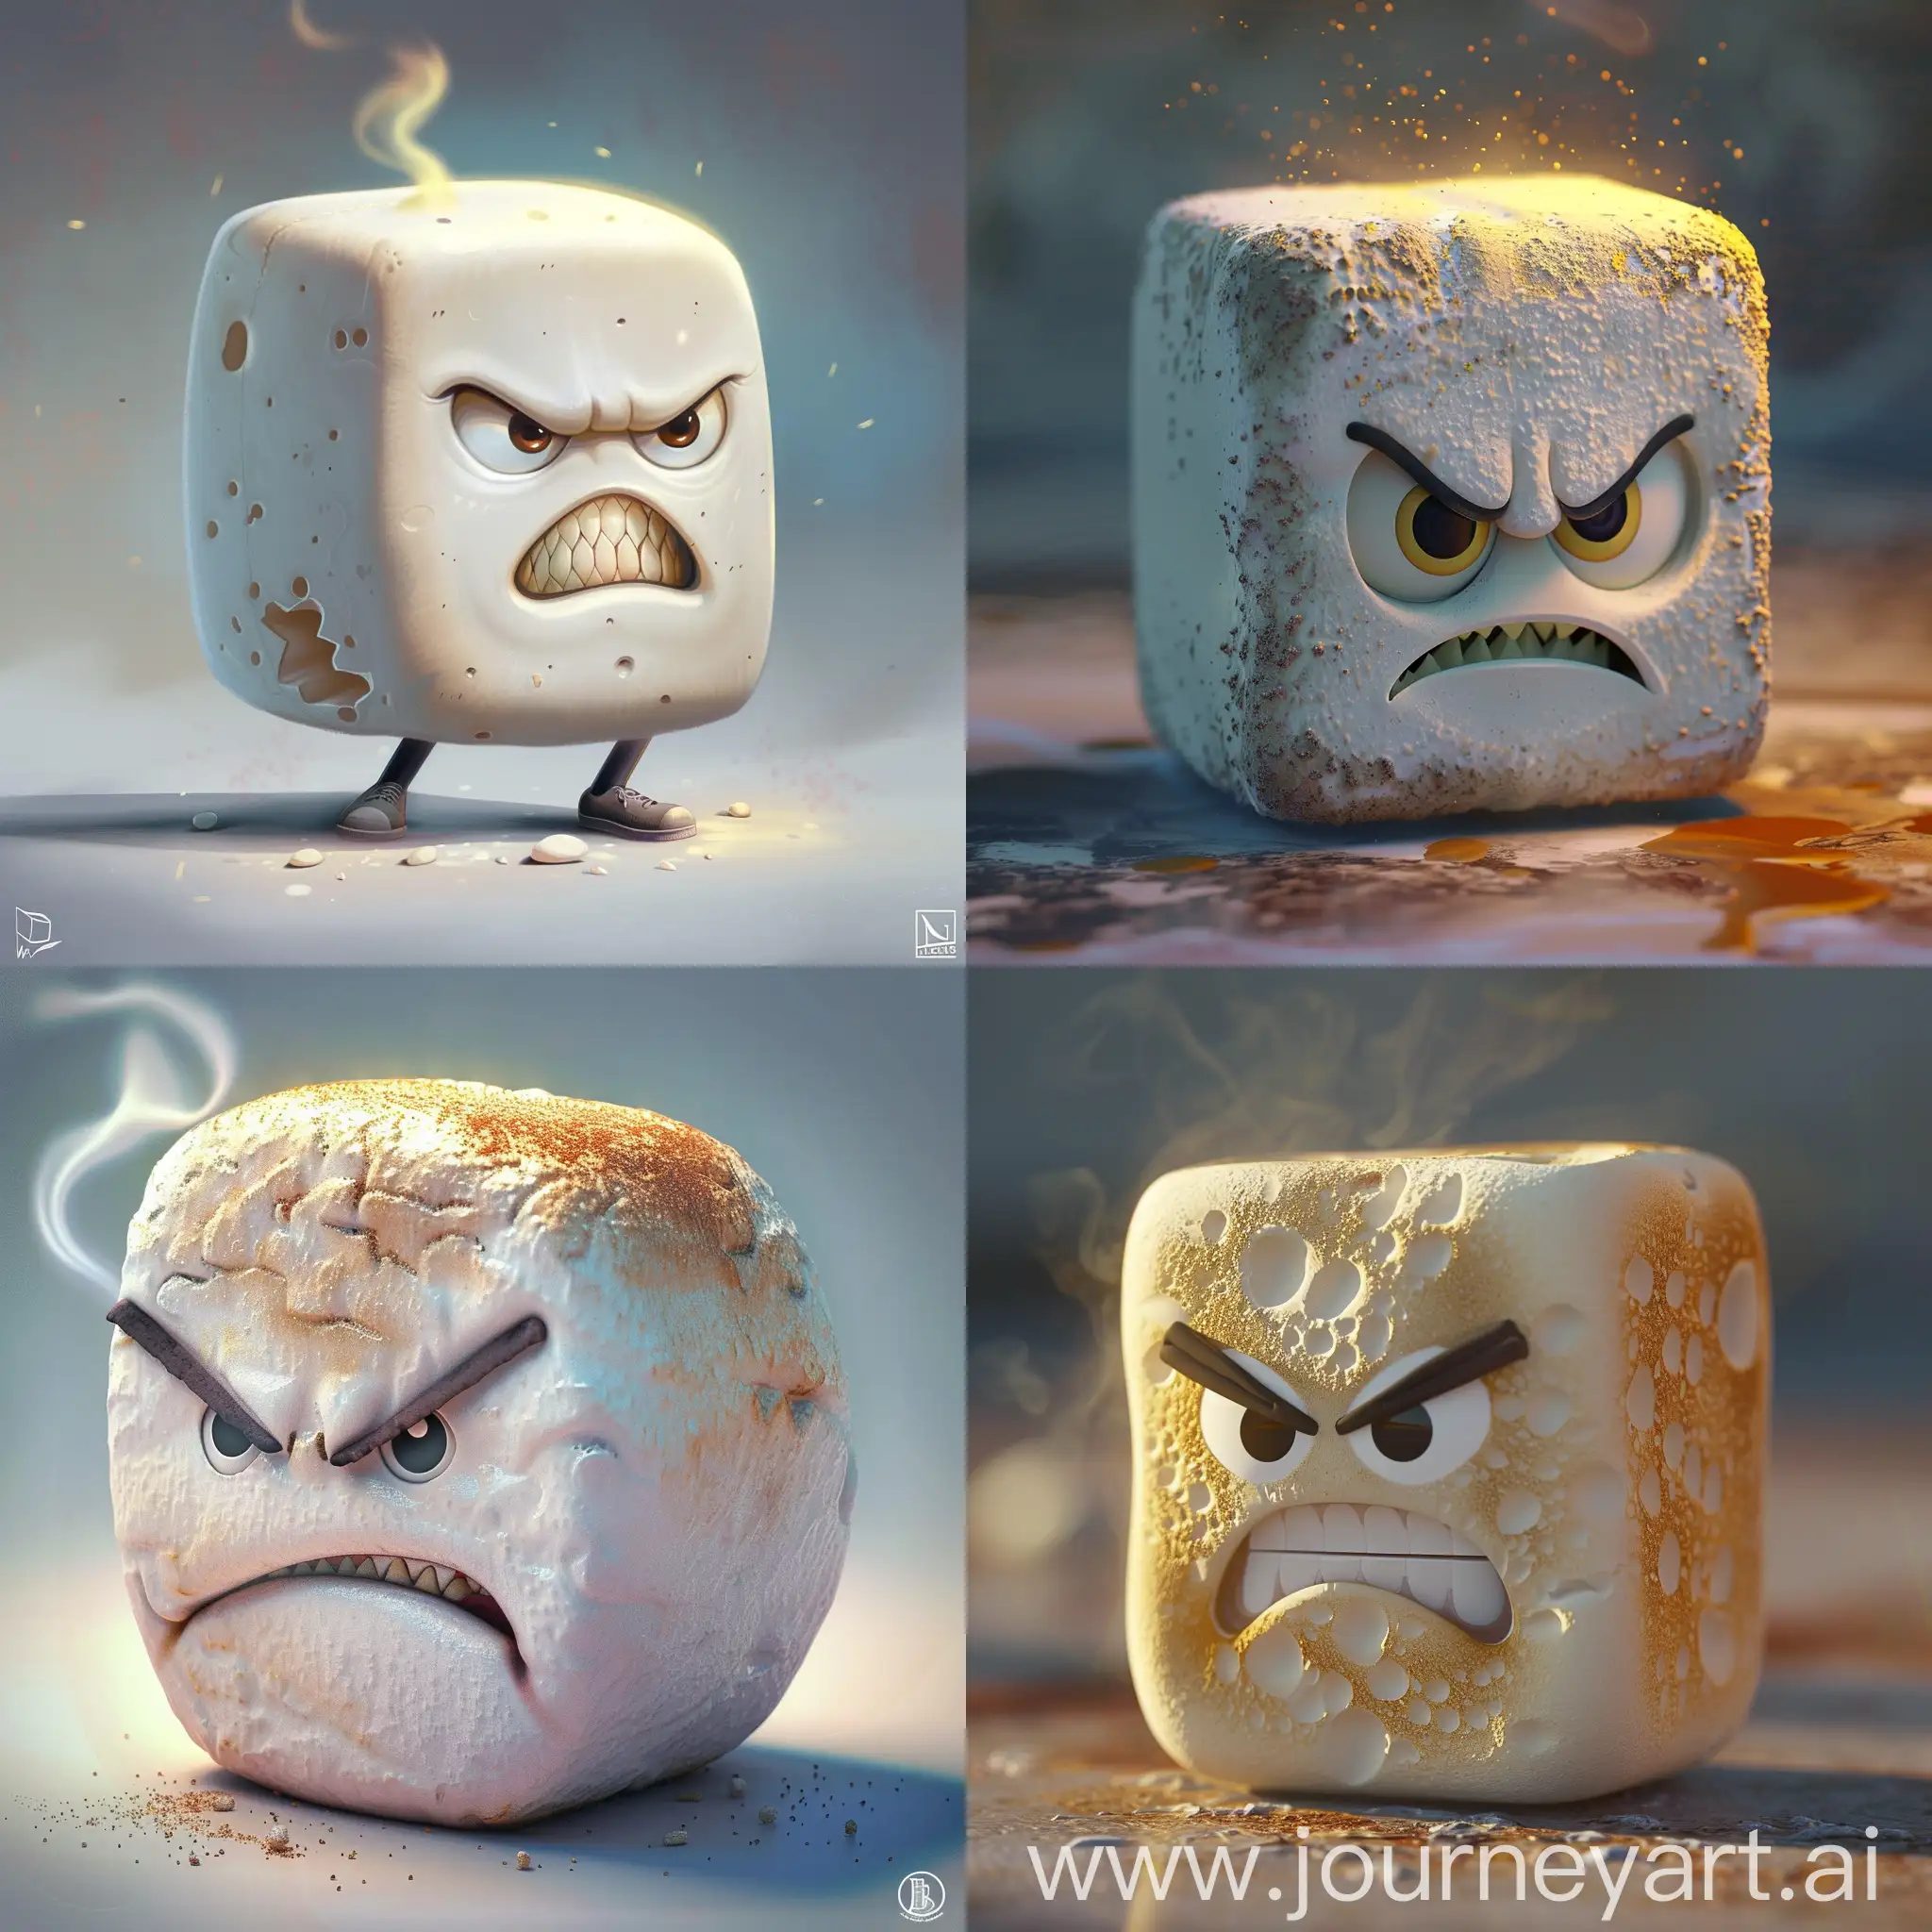 Furious-Marshmallow-Cute-and-Angry-Marshmallow-Creature